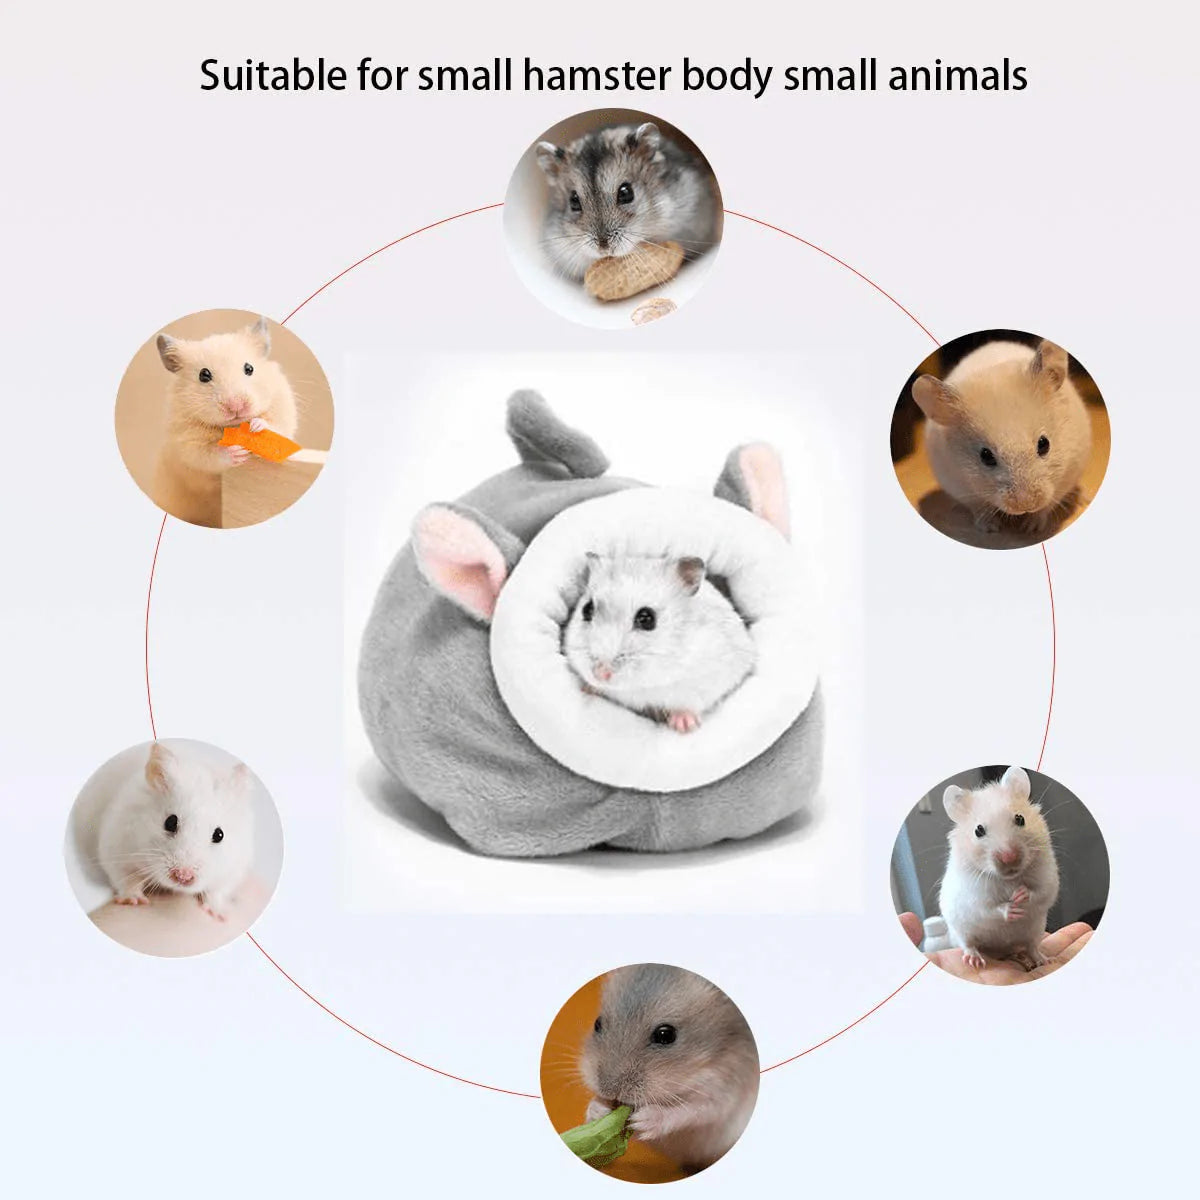 YUEKUA Bed House Soft Hamster House Bed, Cotton Nest and Cushion, Small Pet Animal Habitat Warm Nest Bed Accessories for Hamsters, Guinea Pigs, Hedgehogs Animals & Pet Supplies > Pet Supplies > Small Animal Supplies > Small Animal Habitat Accessories YUEKUA   